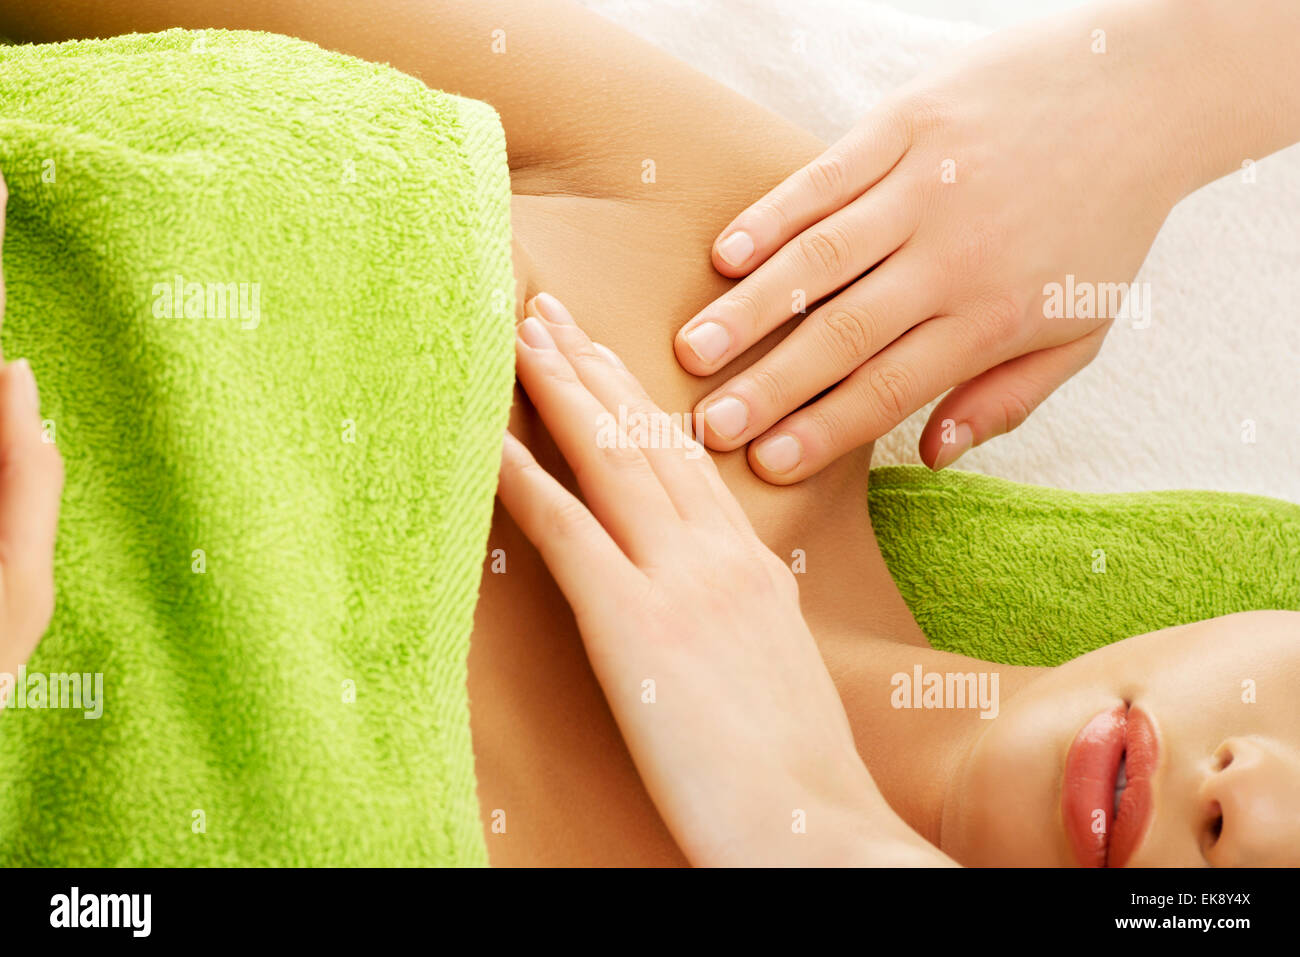 Woman relaxing beeing massaged in spa saloon Stock Photo